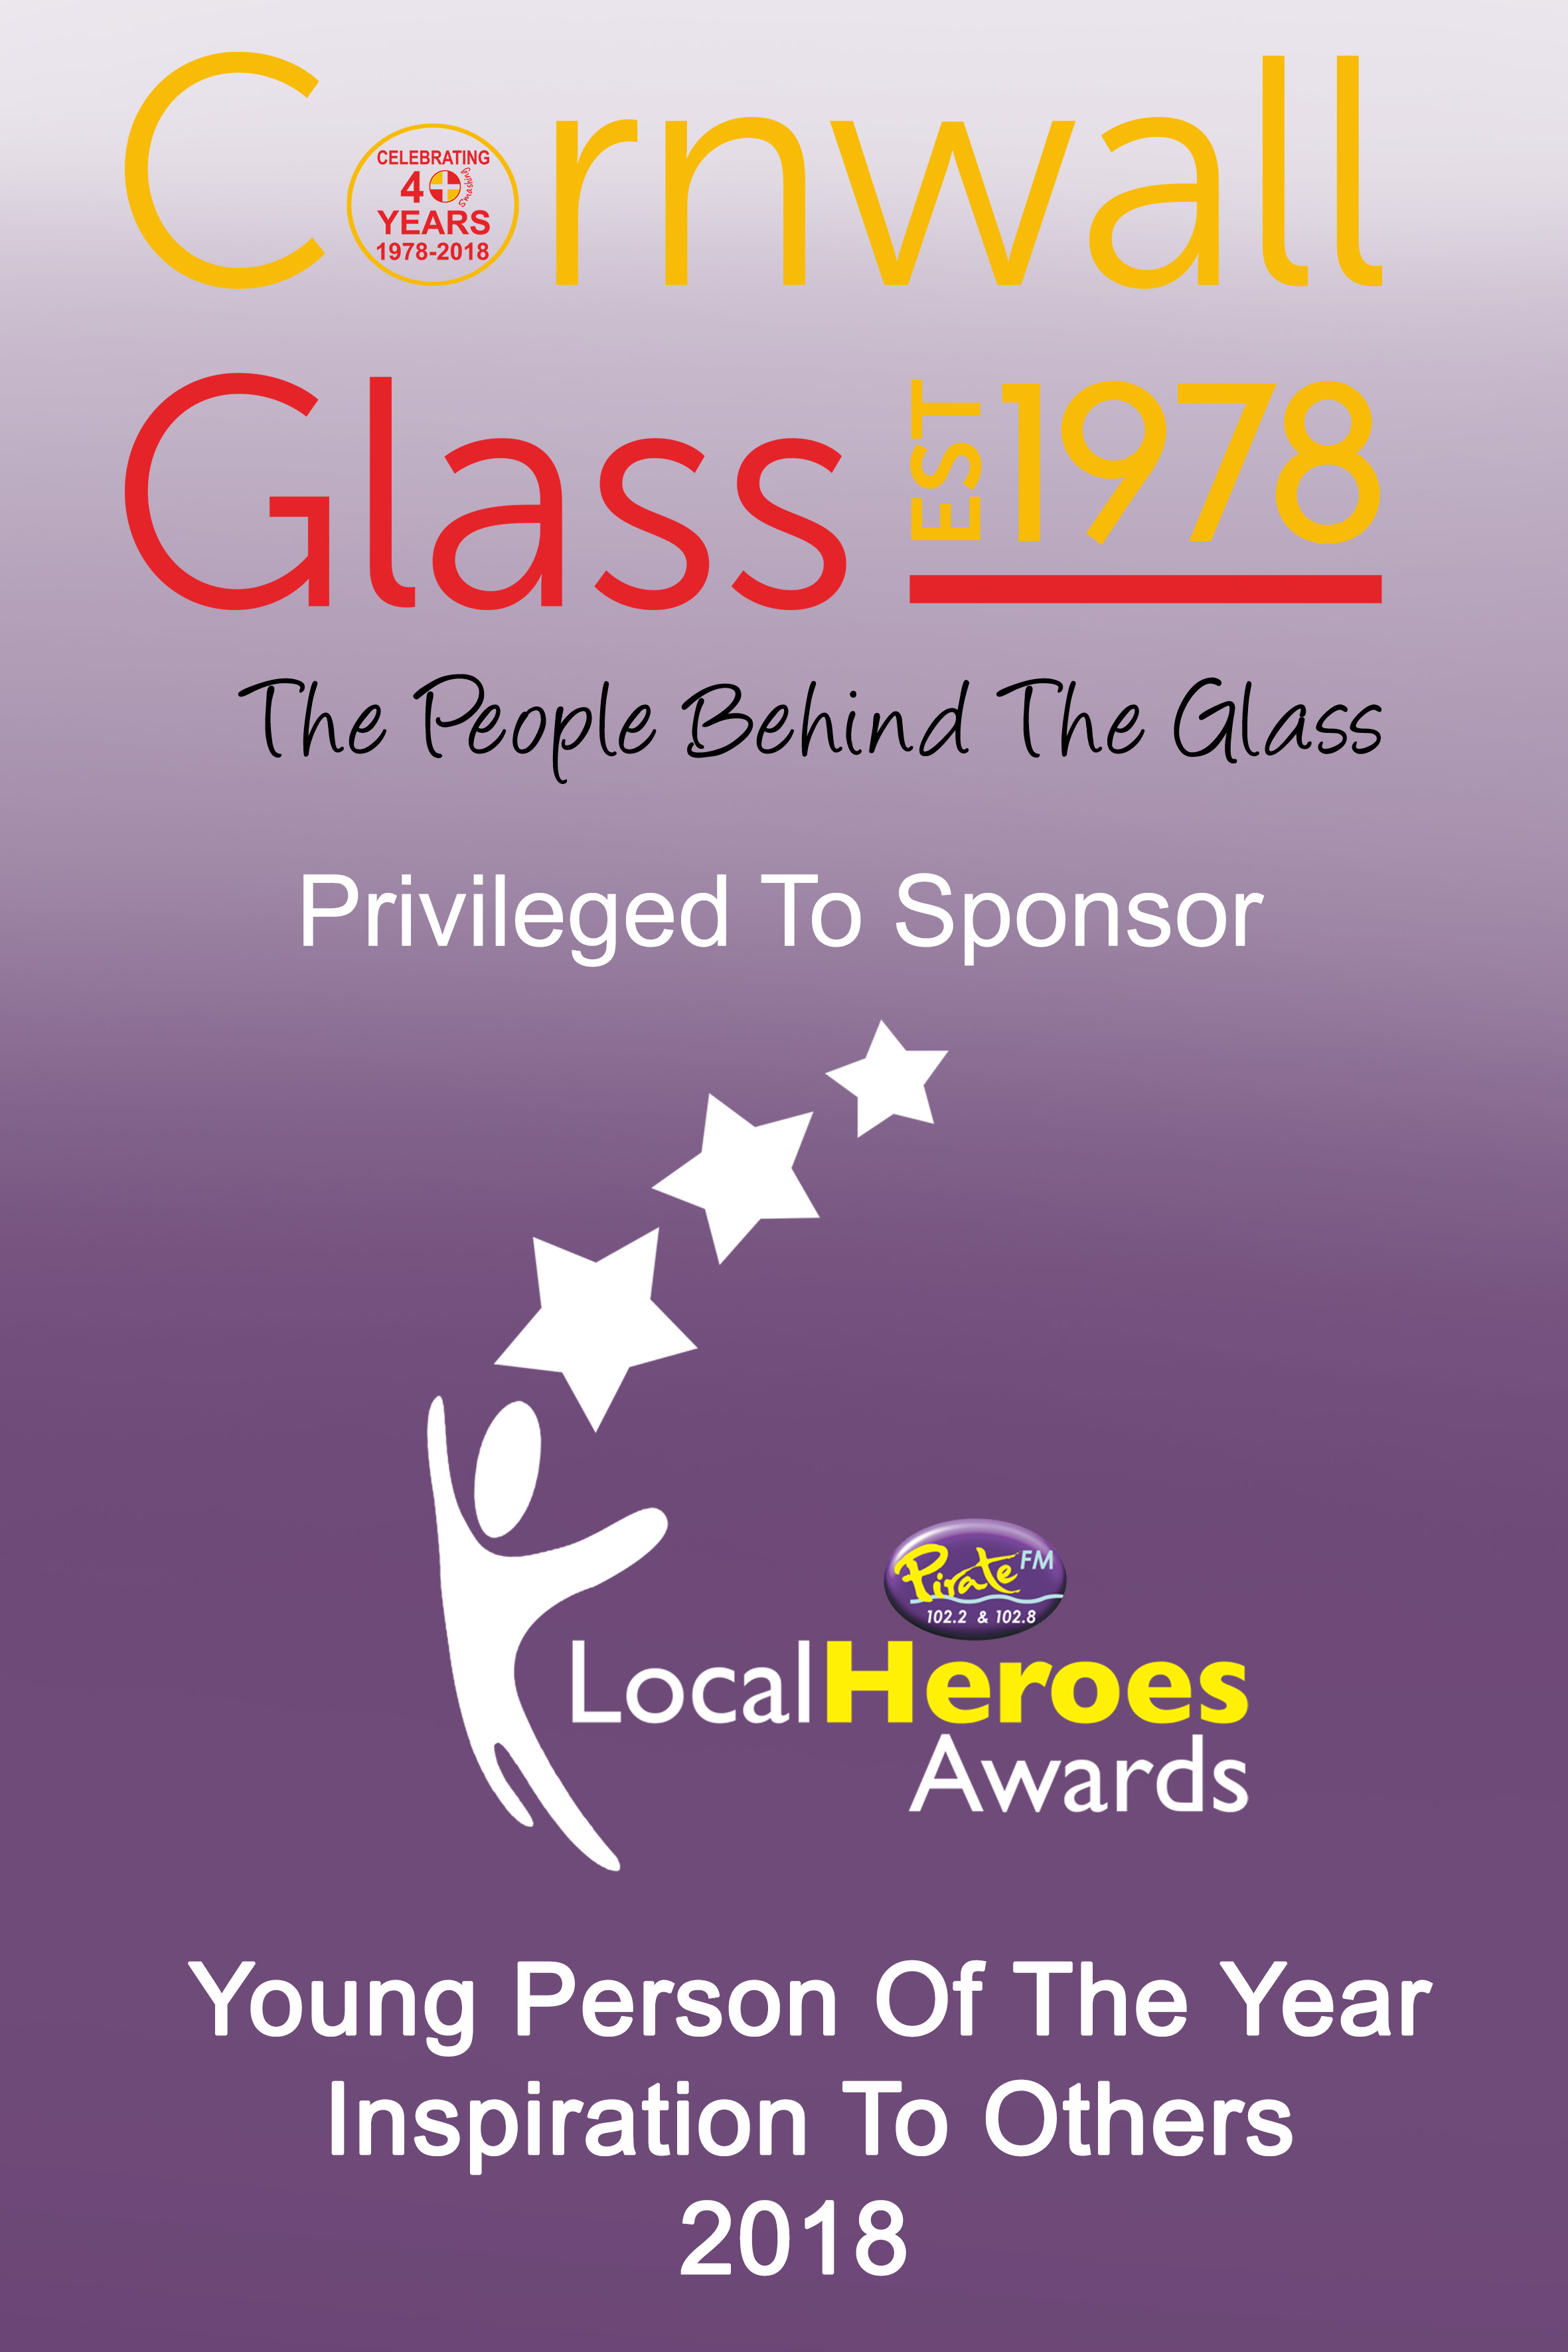 Pirate FM Local Heroes Awards